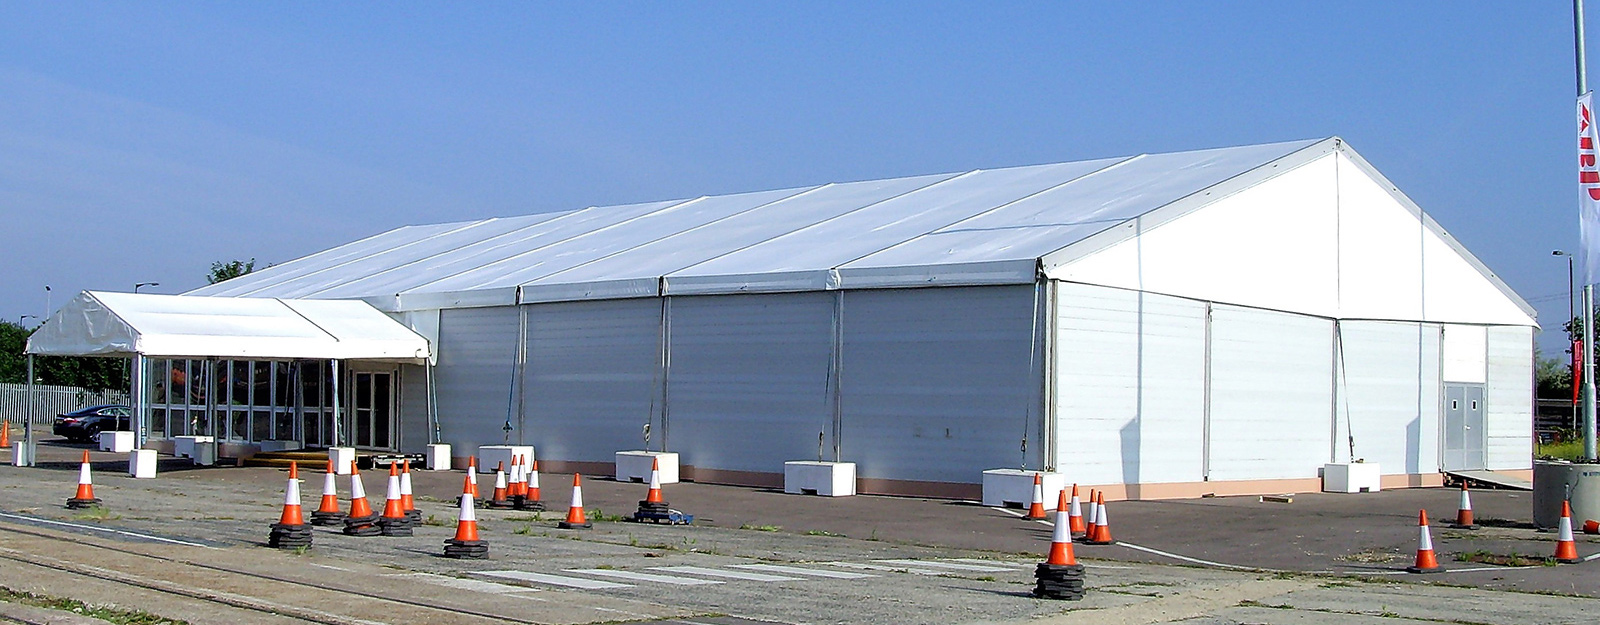 Temporary Demountable Structures